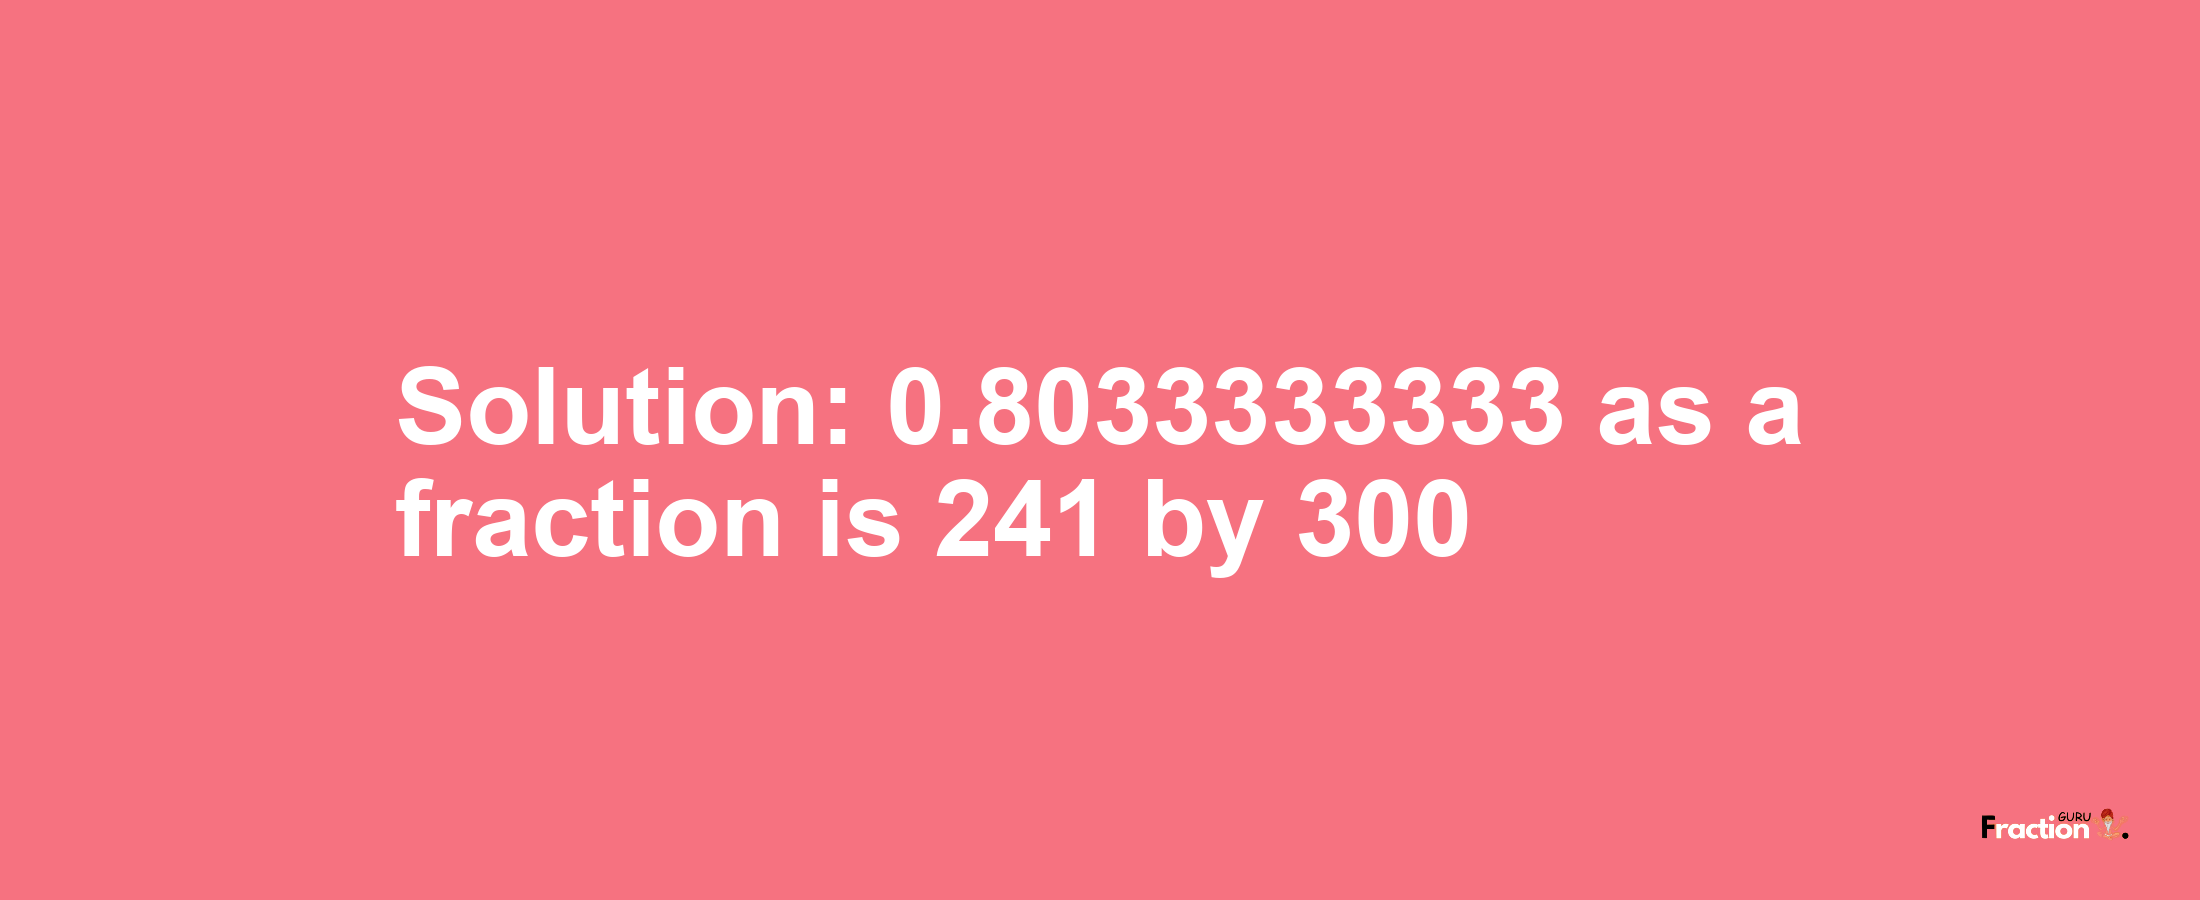 Solution:0.8033333333 as a fraction is 241/300